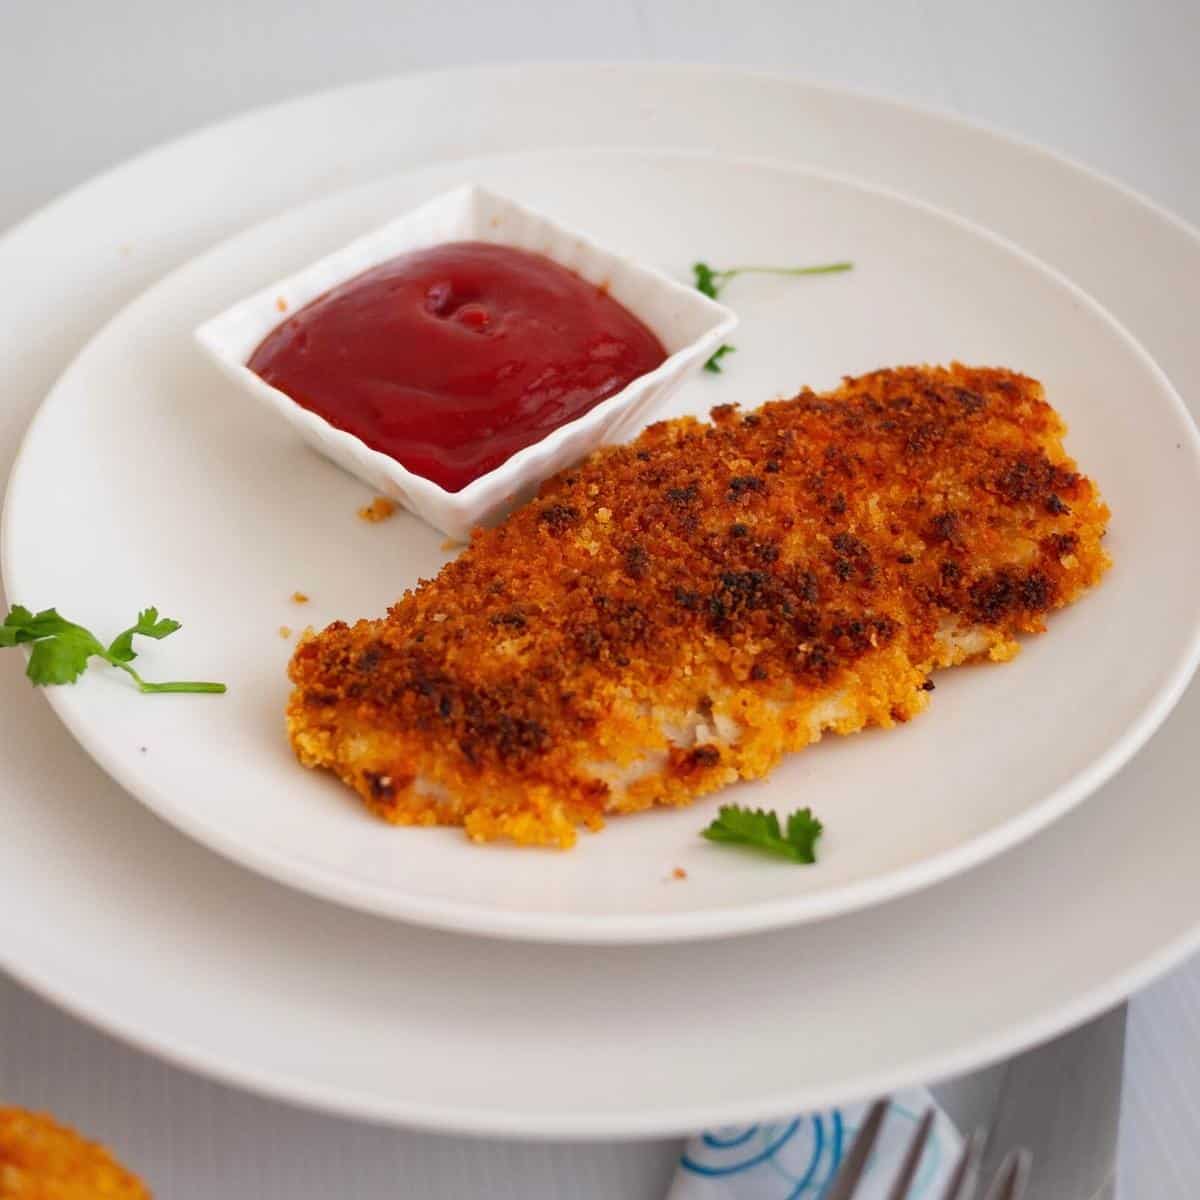 A schnitzel and ketchup on a plate.